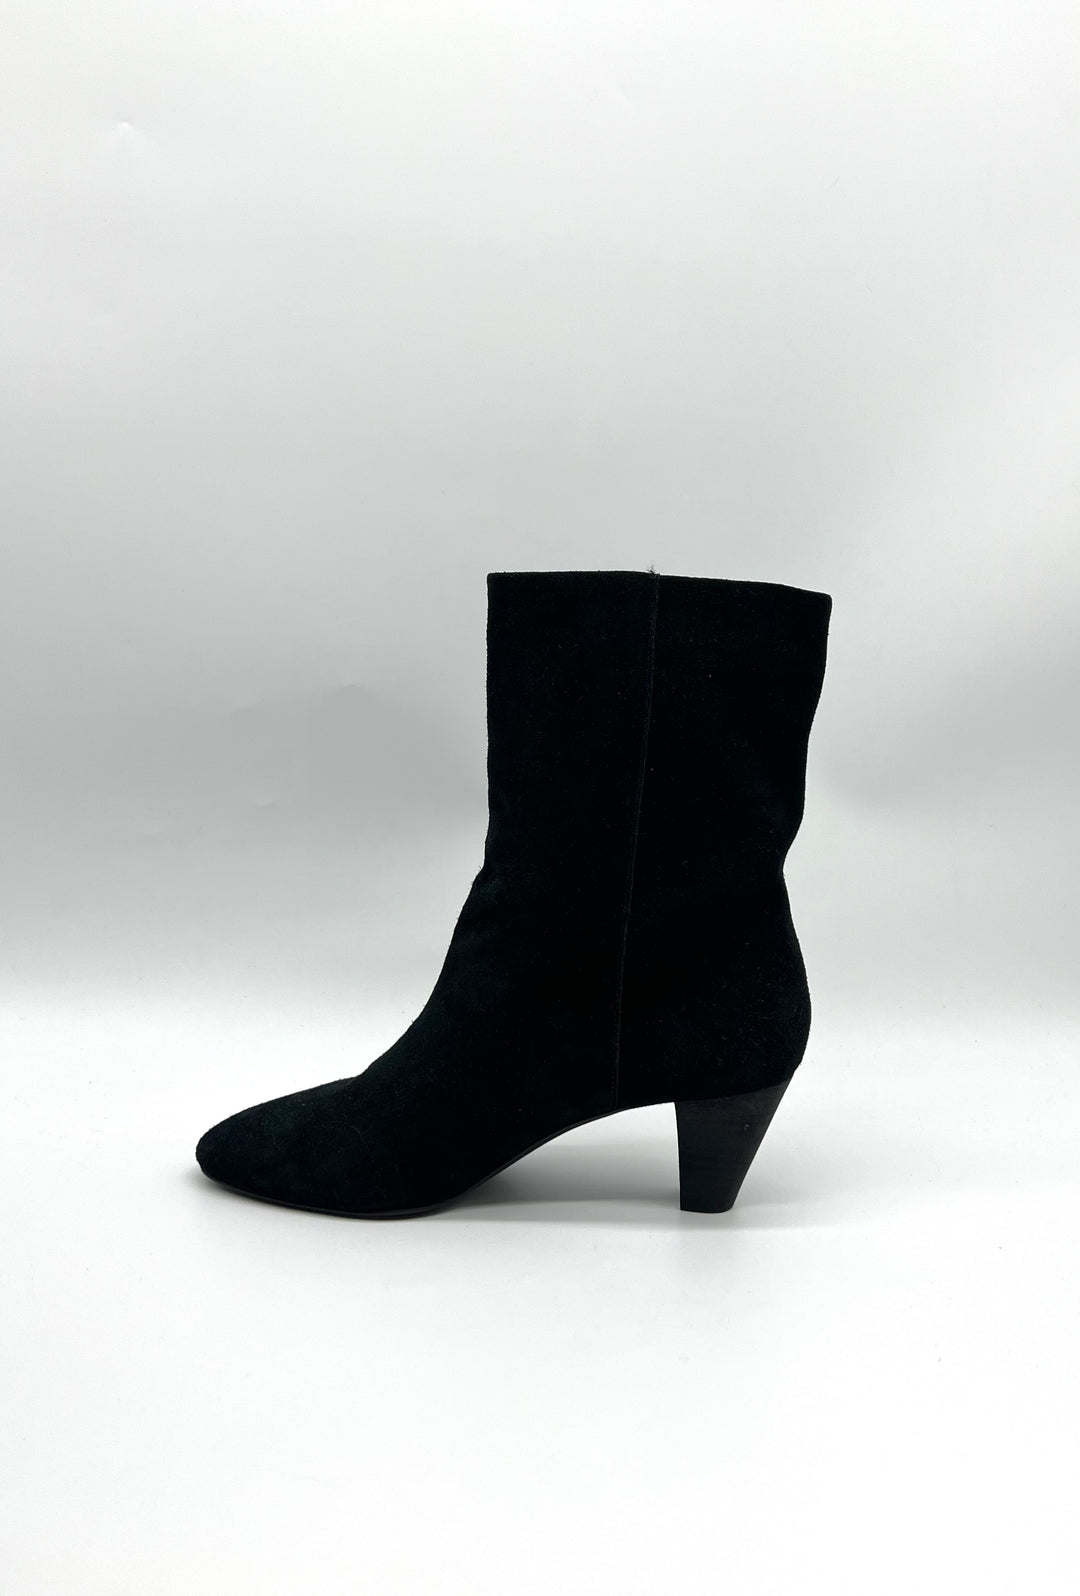 POLO Boots Black Calf Suede Size 37 Low Heel Booties